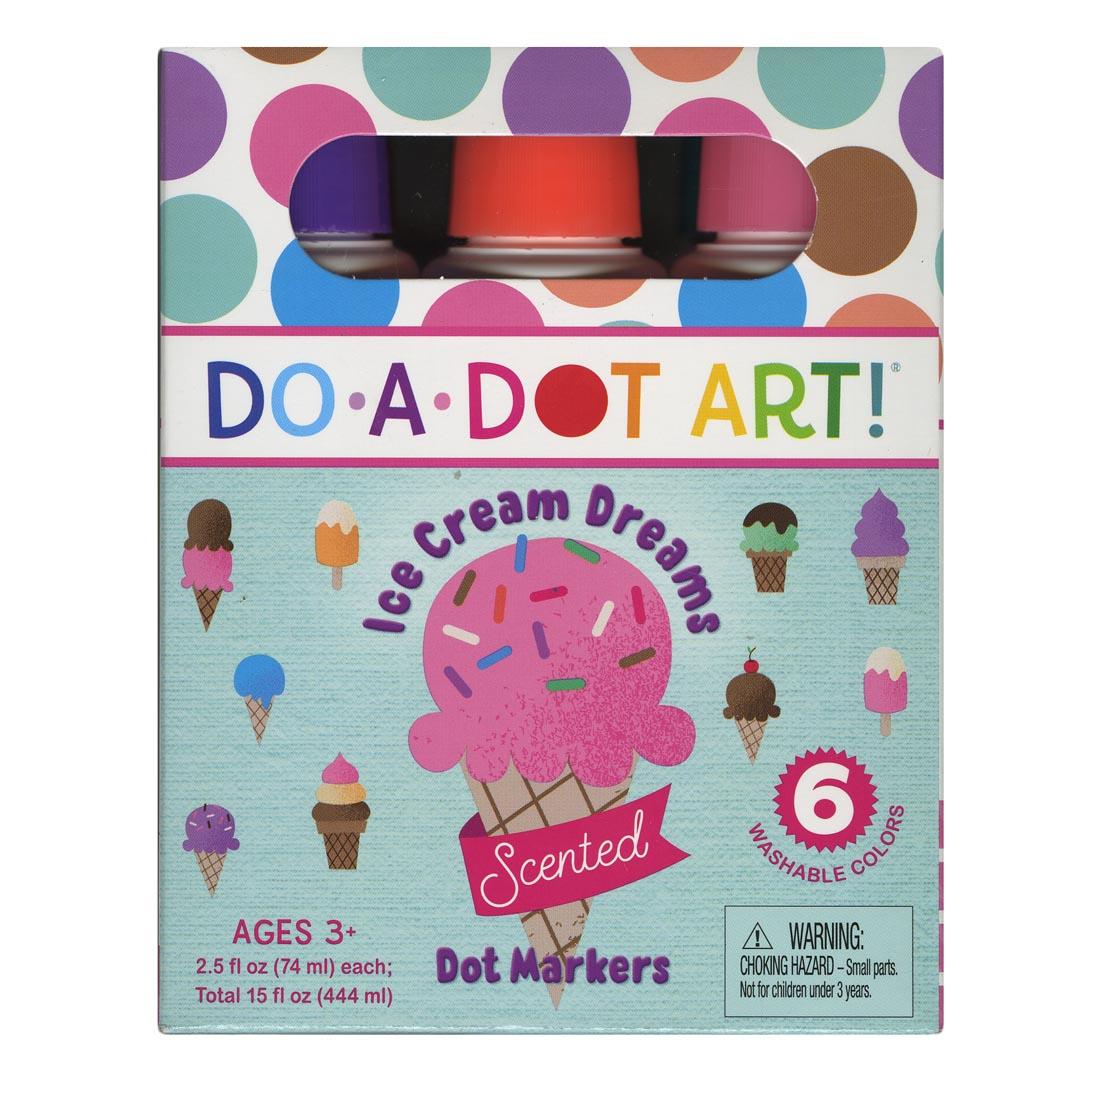 Do-A-Dot Art! Ice Cream Dreams Scented Dot Markers